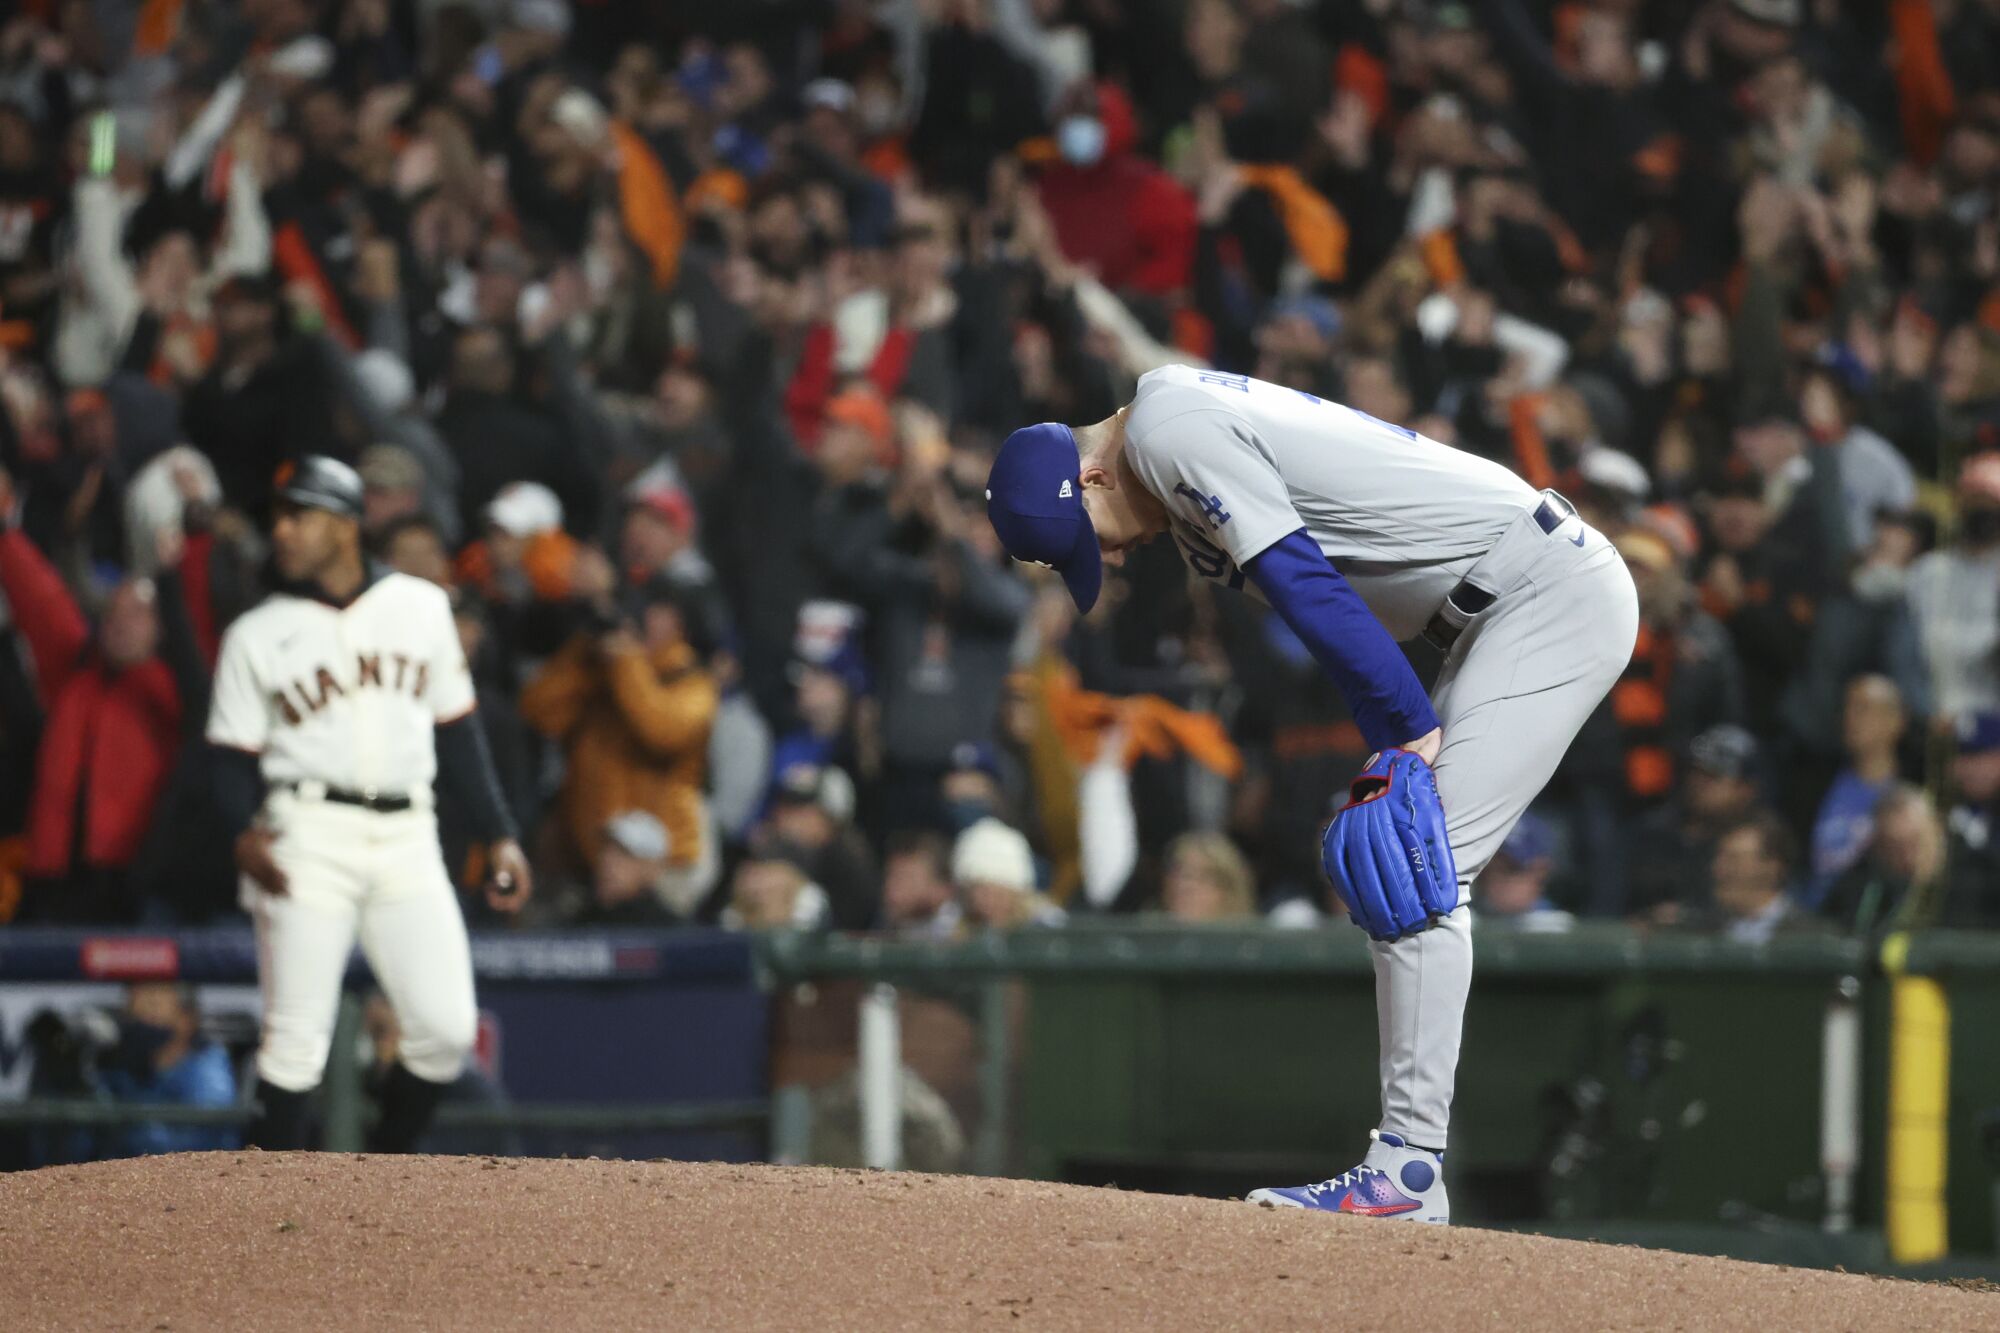  Dodgers' Walker Buehler reacts after giving up a solo home run to Giants' Kris Bryant